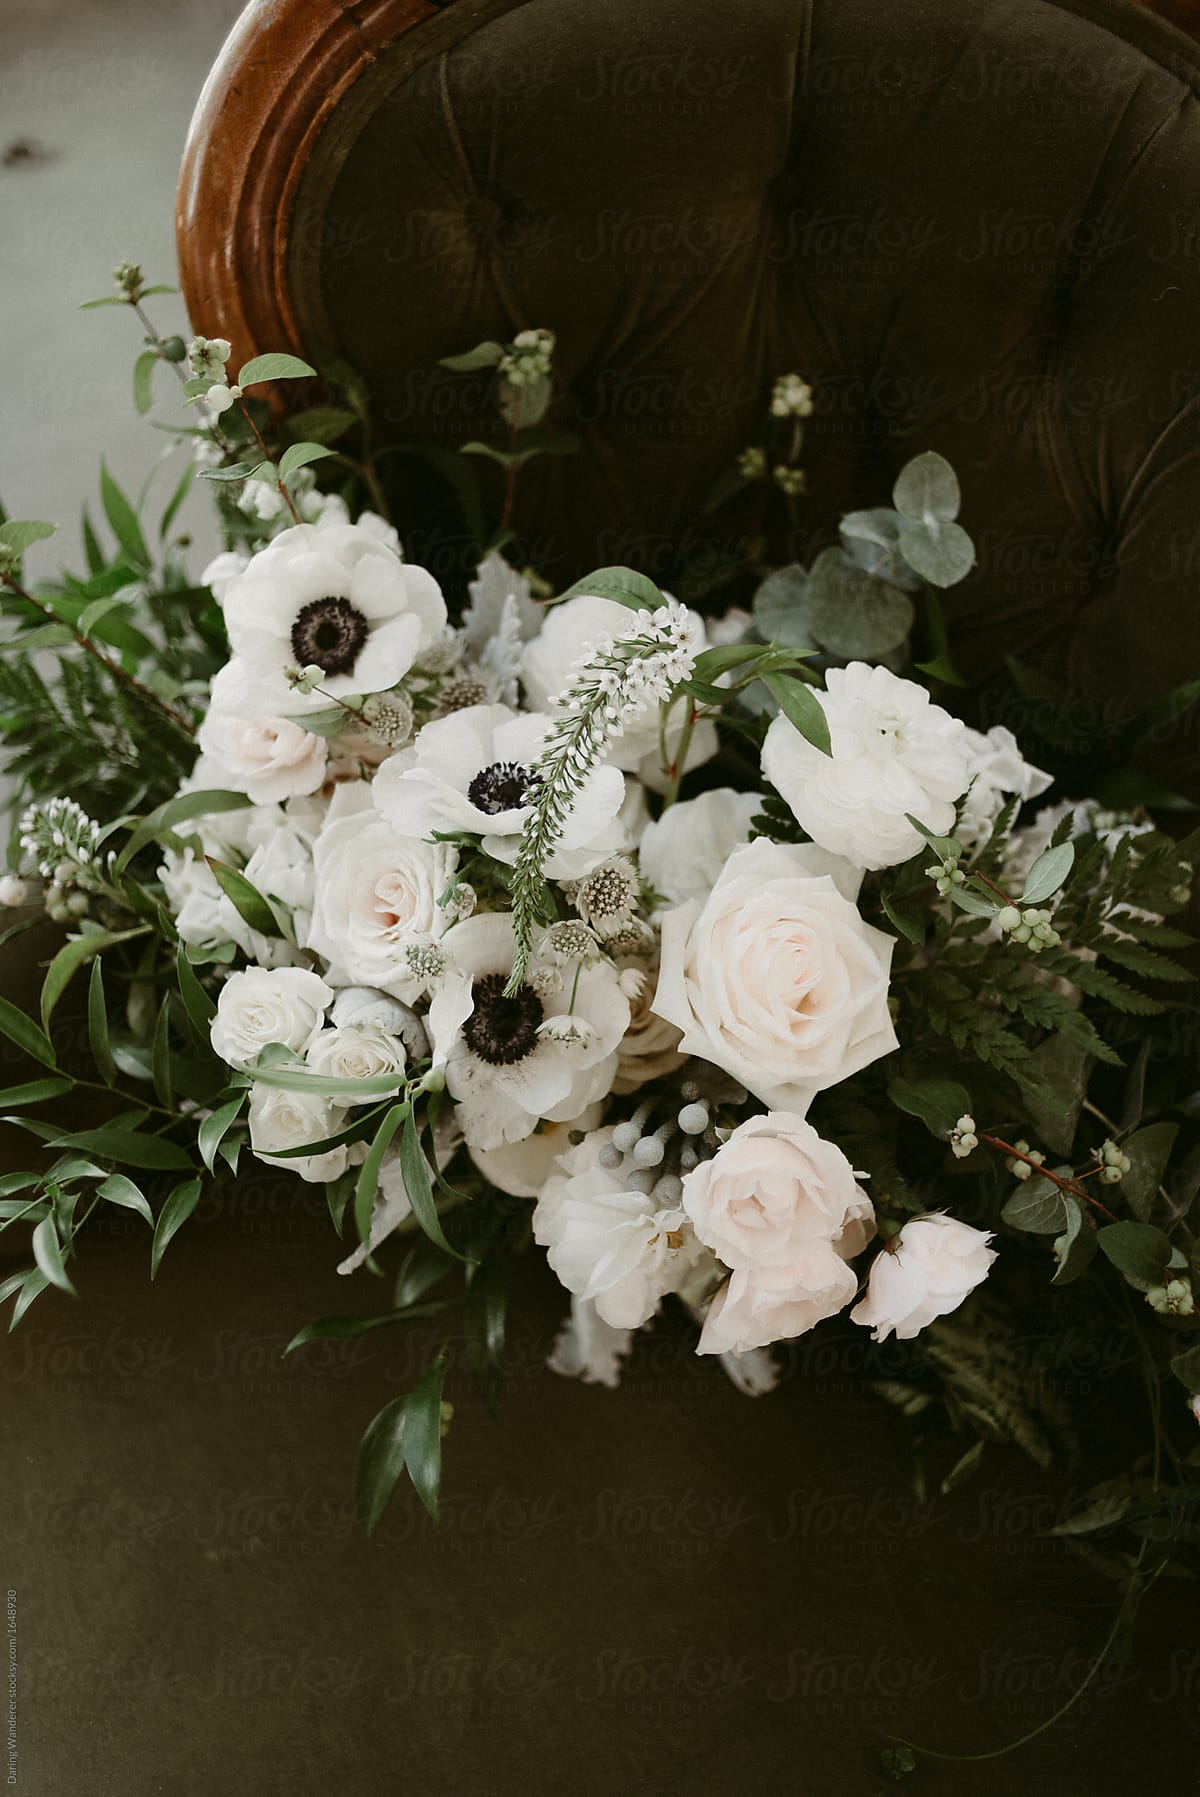 Simple white and green wedding bouquet with vines and white flowers